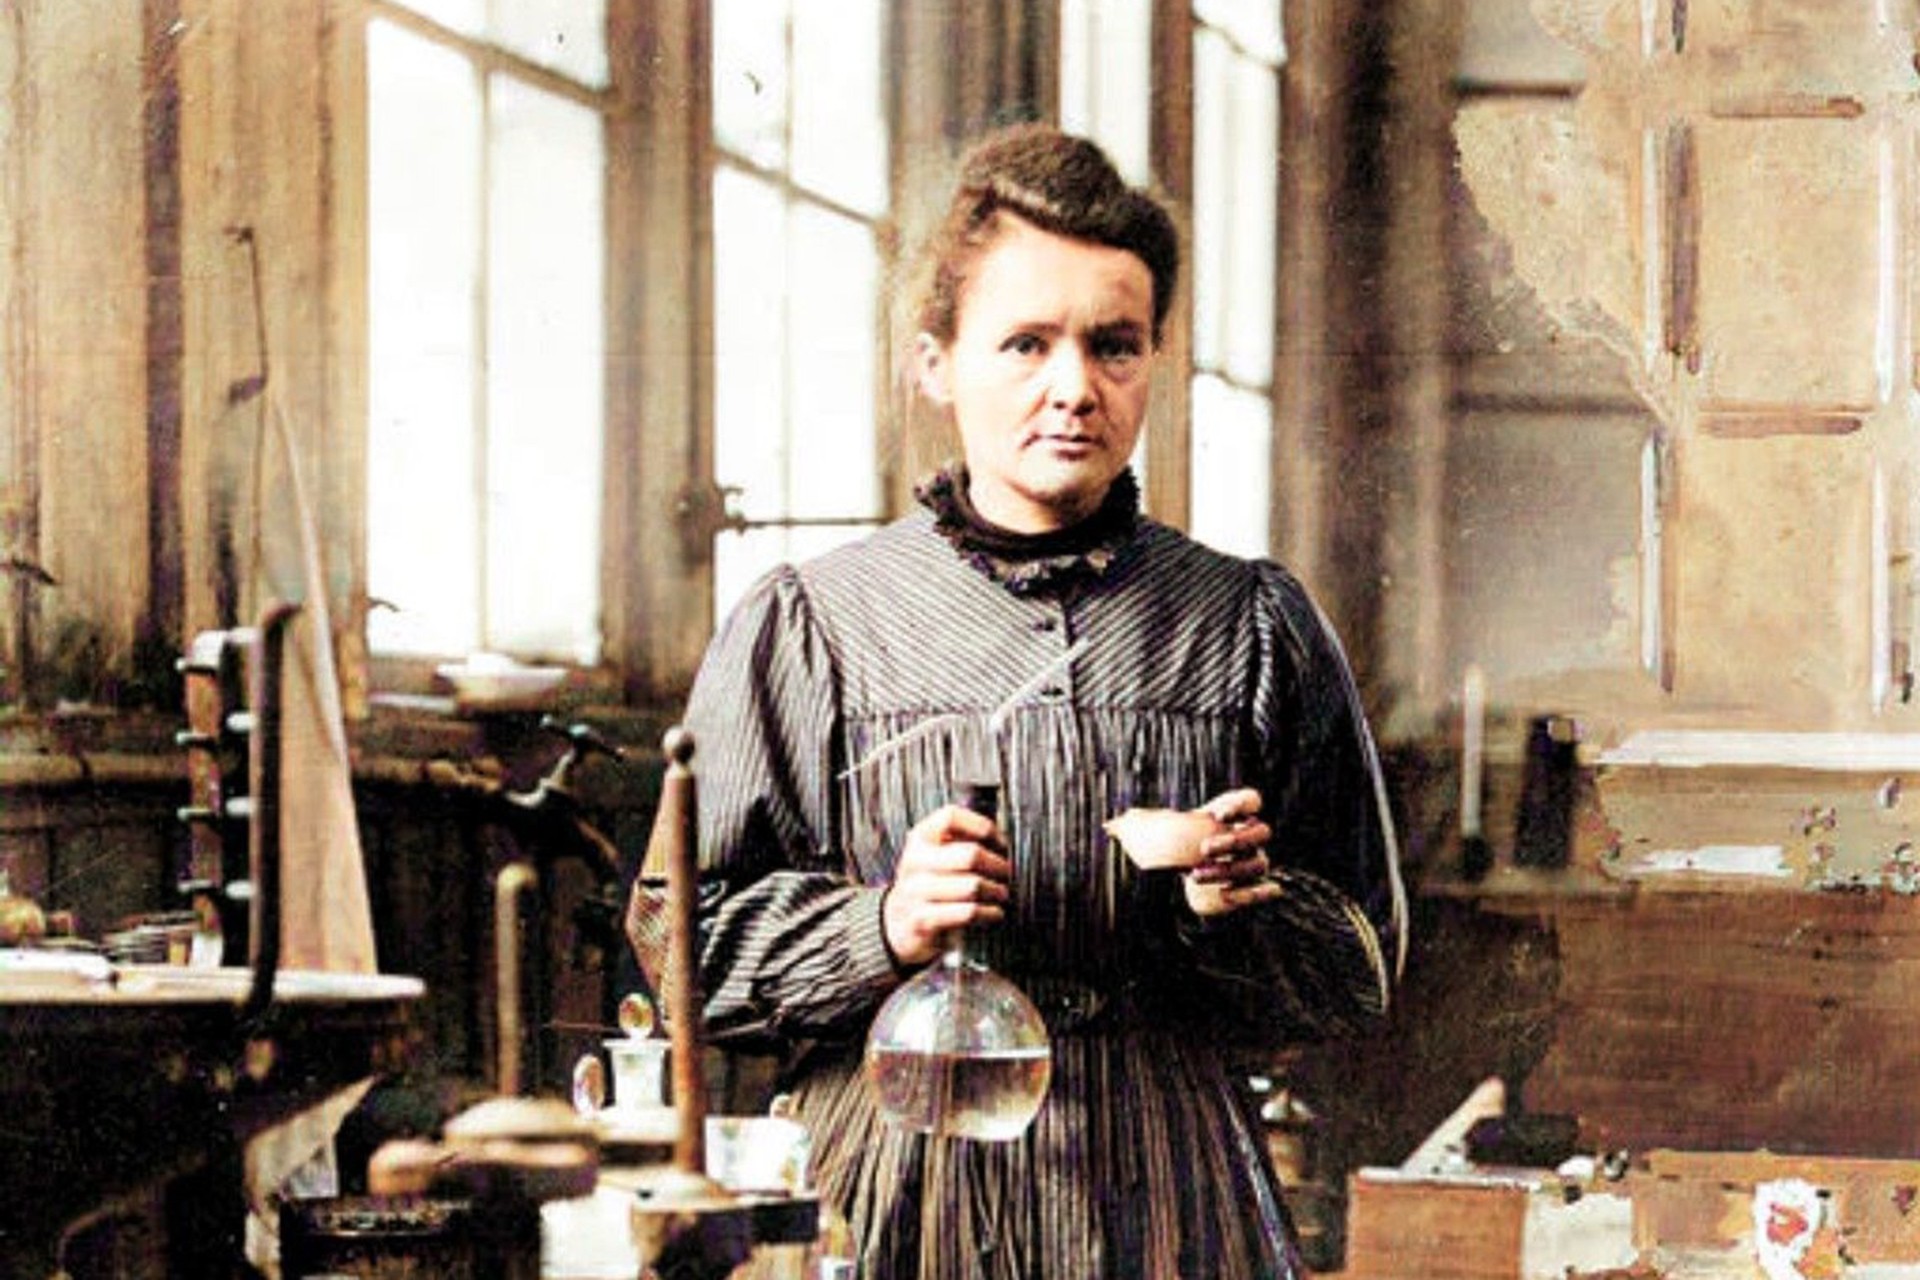 The first woman scholar to break the male-dominated structure in the world of science: Madame Curie